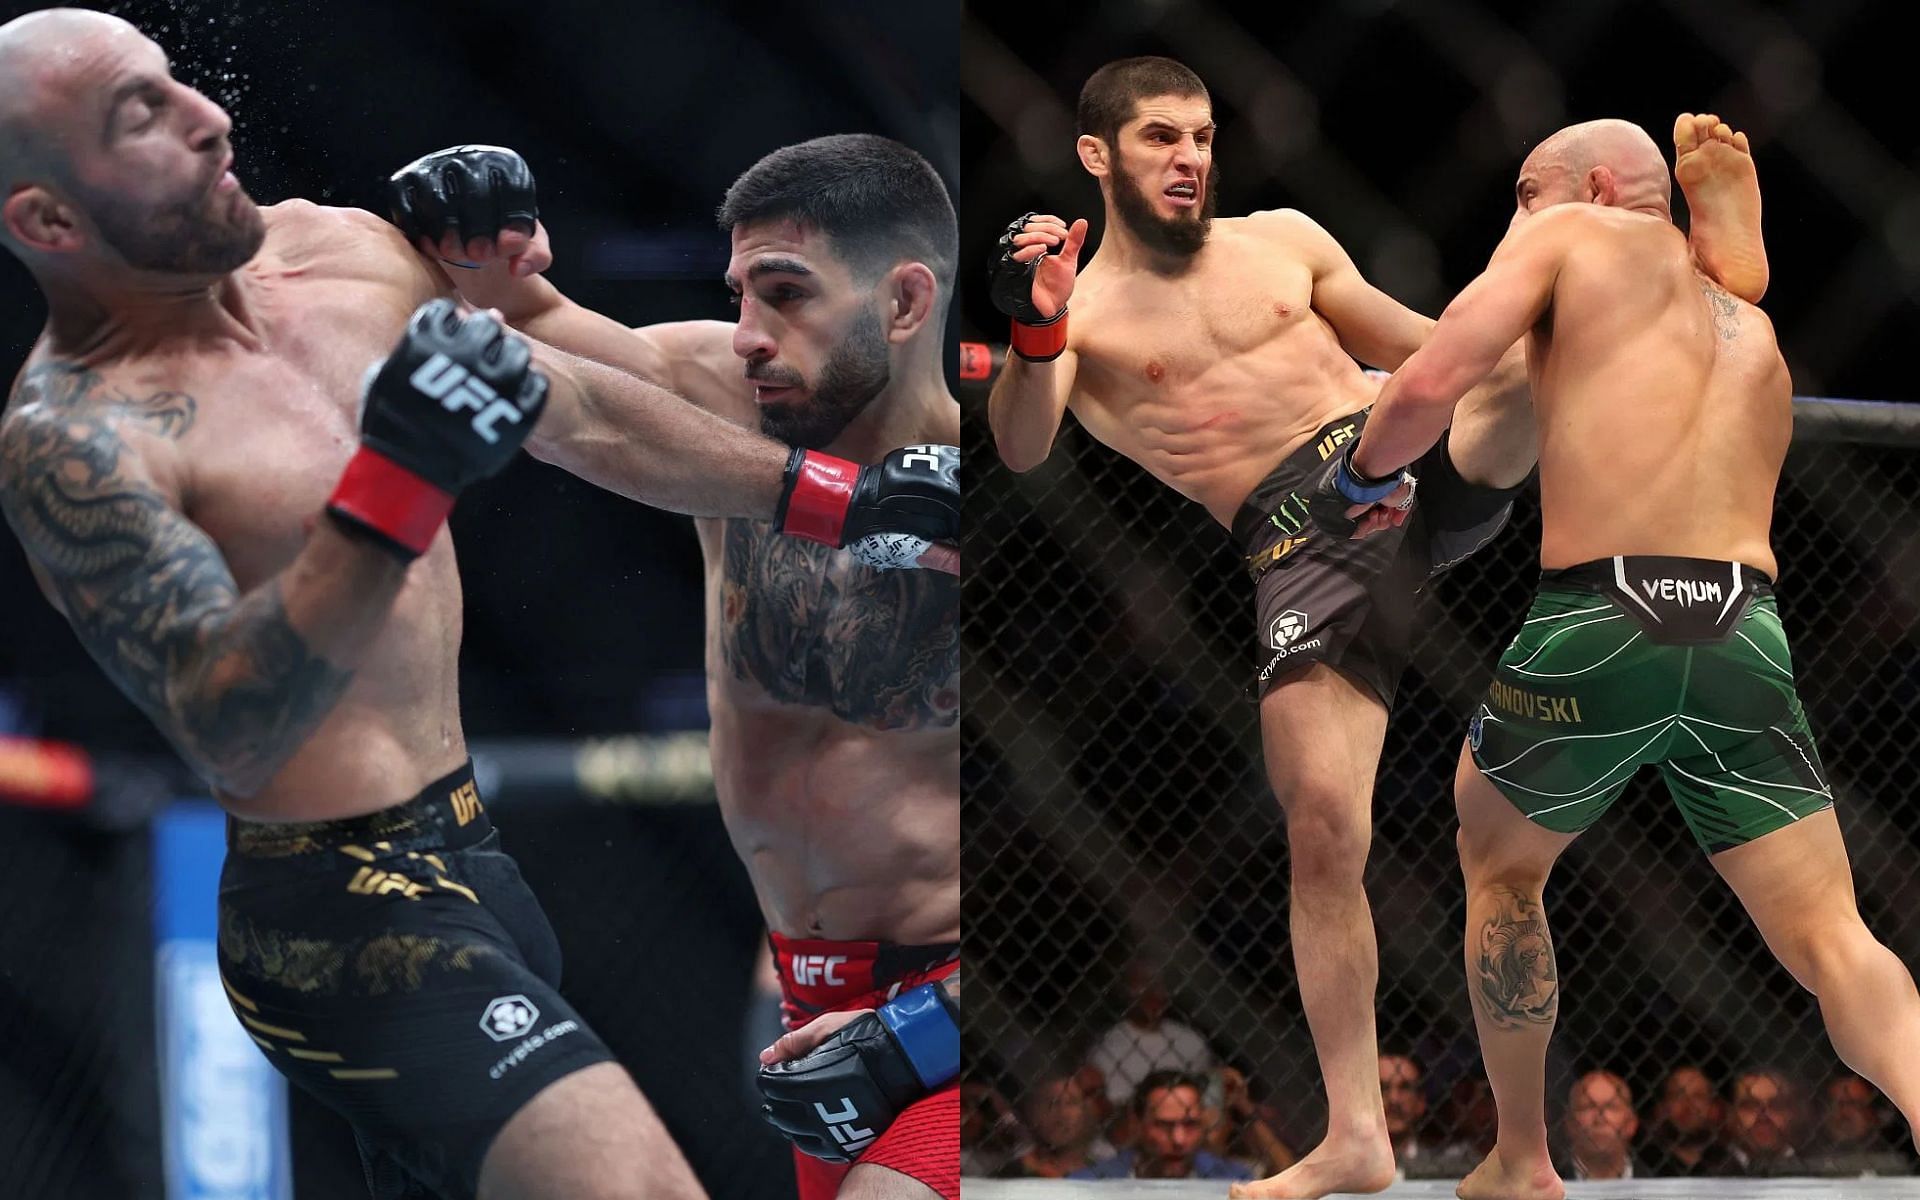 Alexander Volkanovski denies his KO loss to Islam Makhachev (right) had lingering effects against Ilia Topuria (left) [Images Courtesy: @GettyImages]